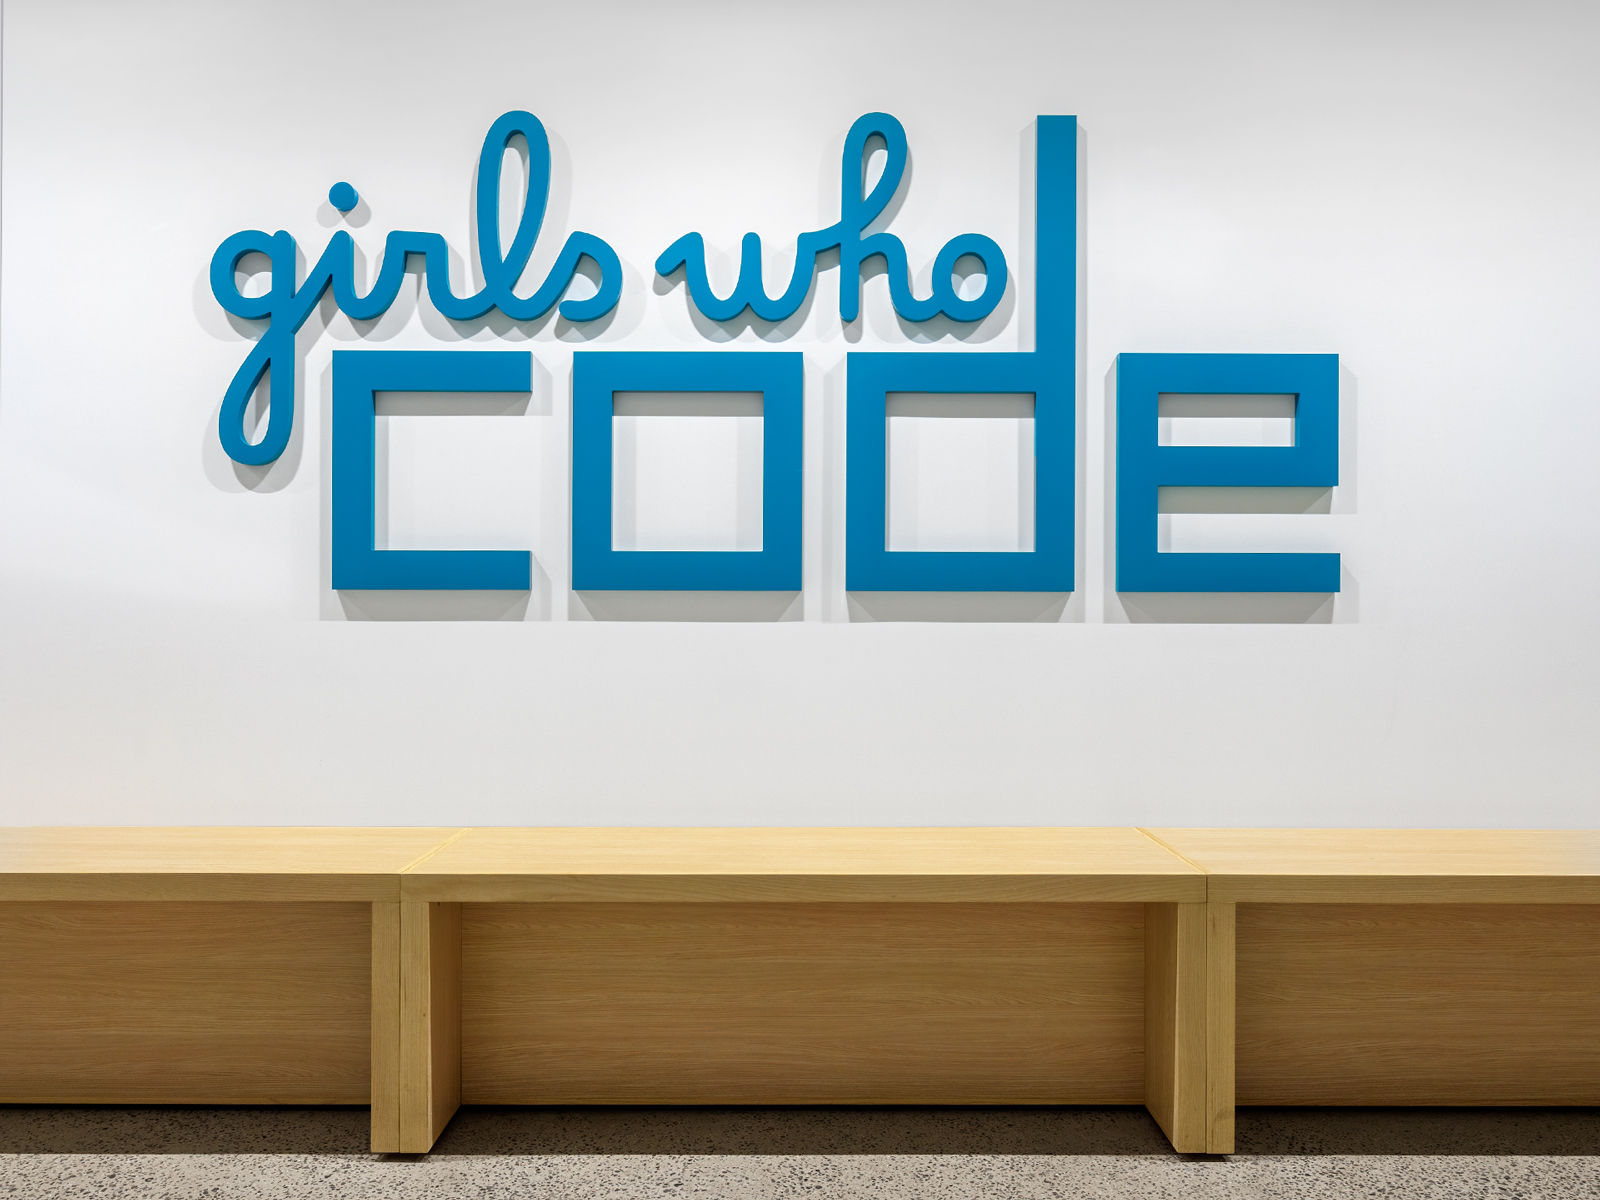 Wall graphics for Girls Who Code